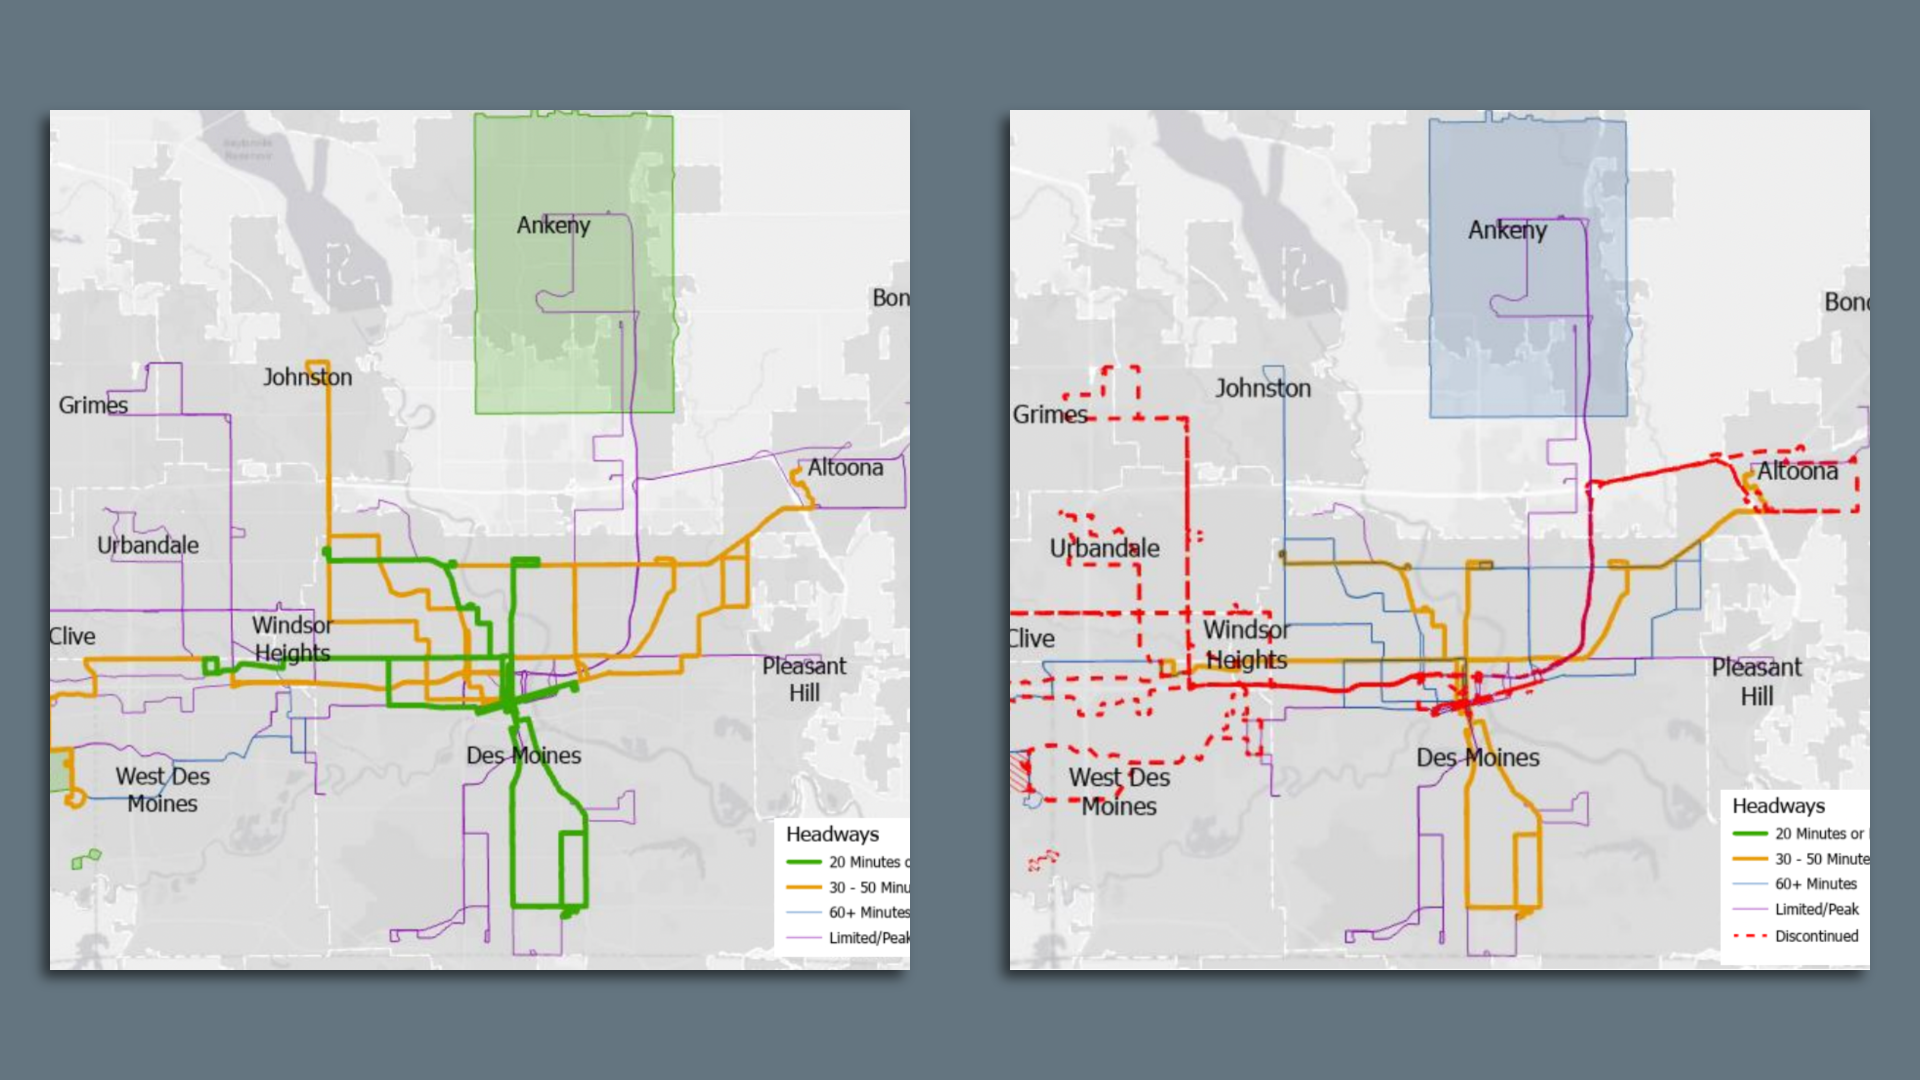 Left: A map showing the routes services if DART is fully funded. Right: Routes that would be reduced or cut if DART doesn't receive any additional funds.